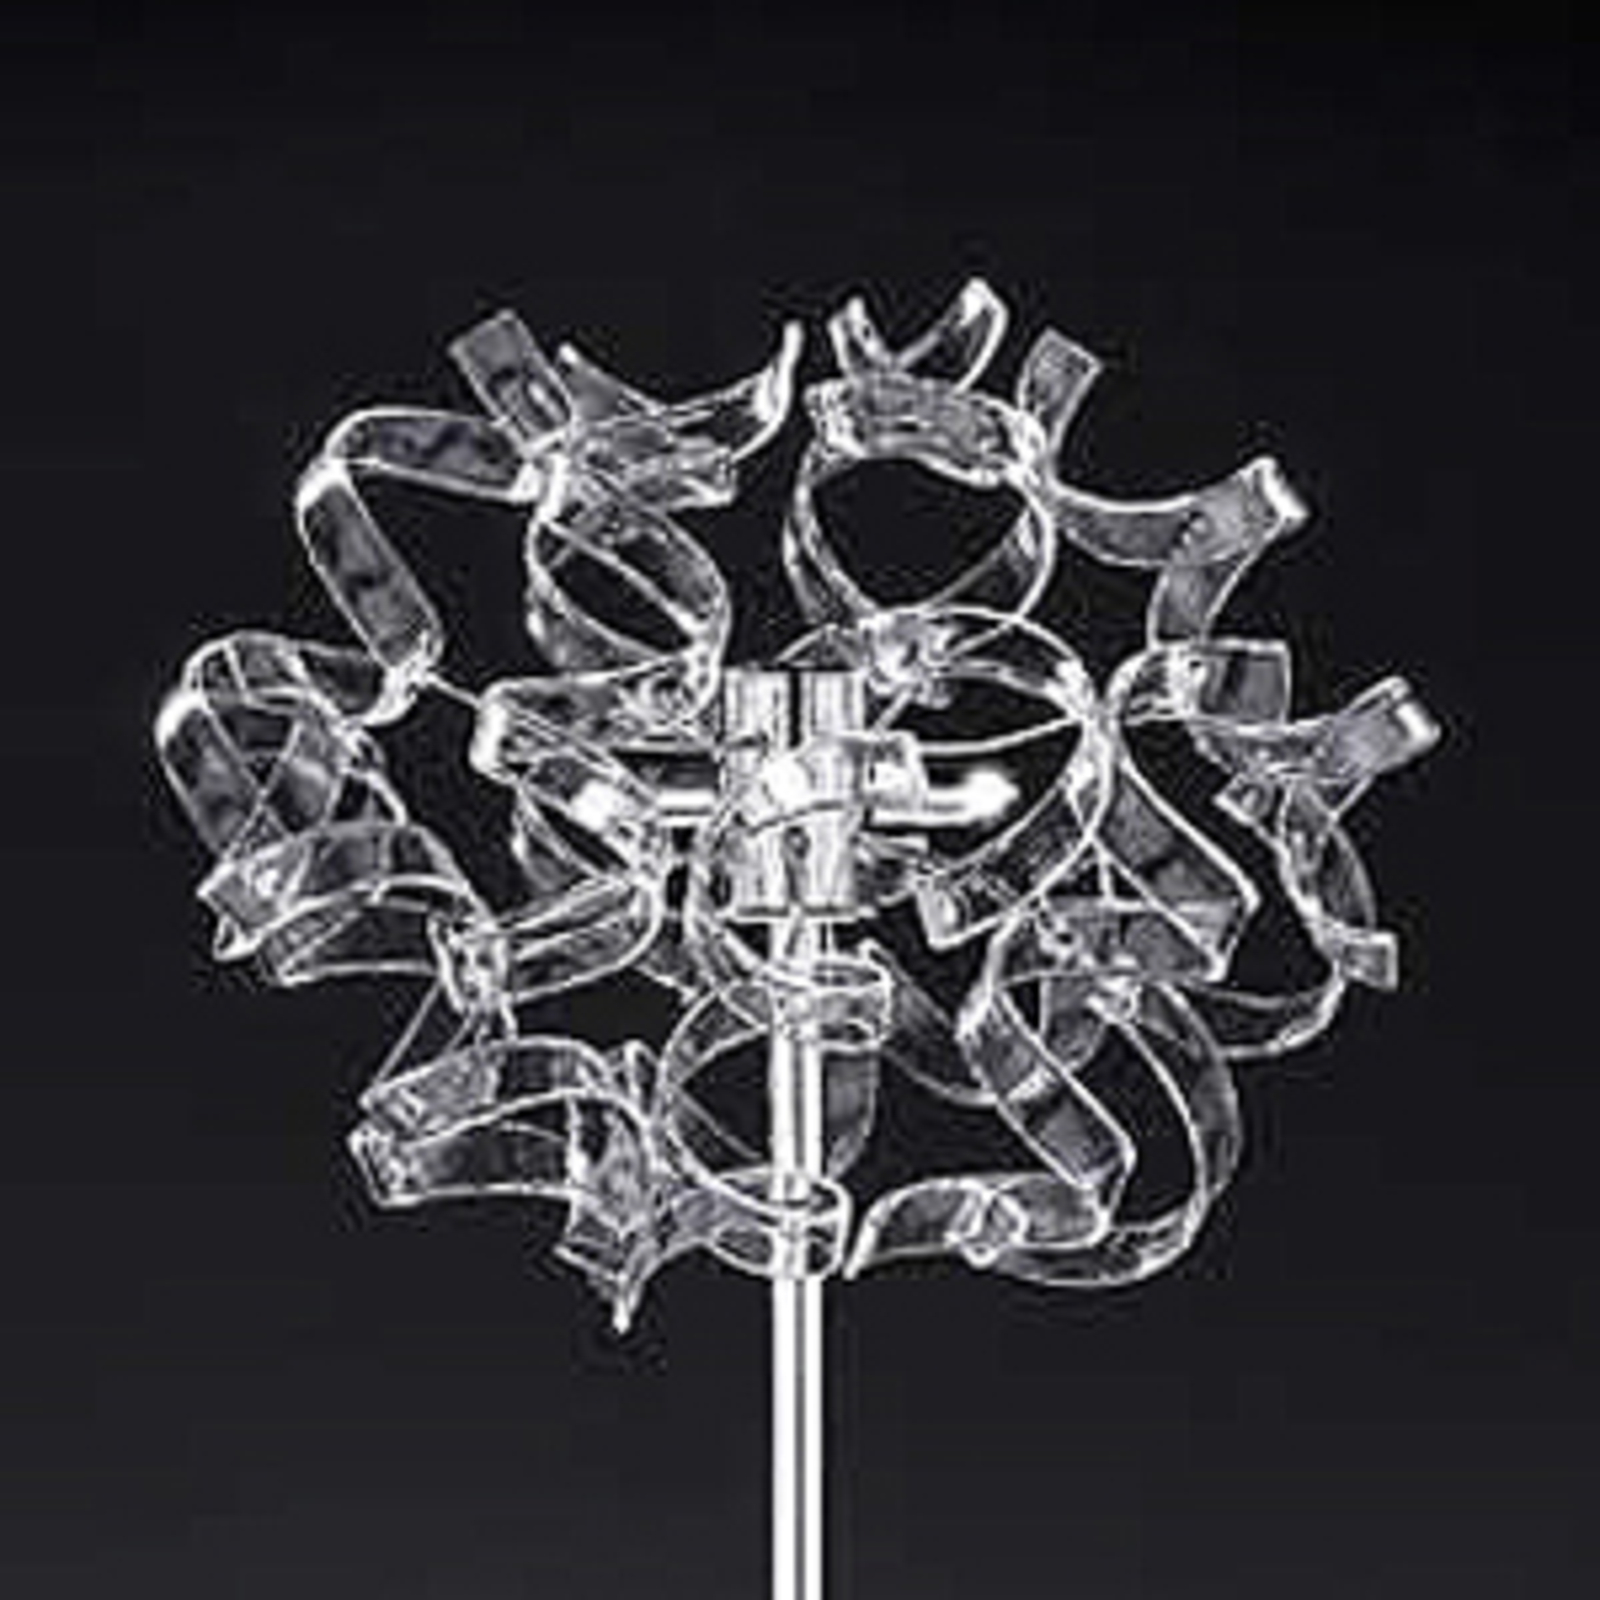 Crystal floor lamp with crystals at the top